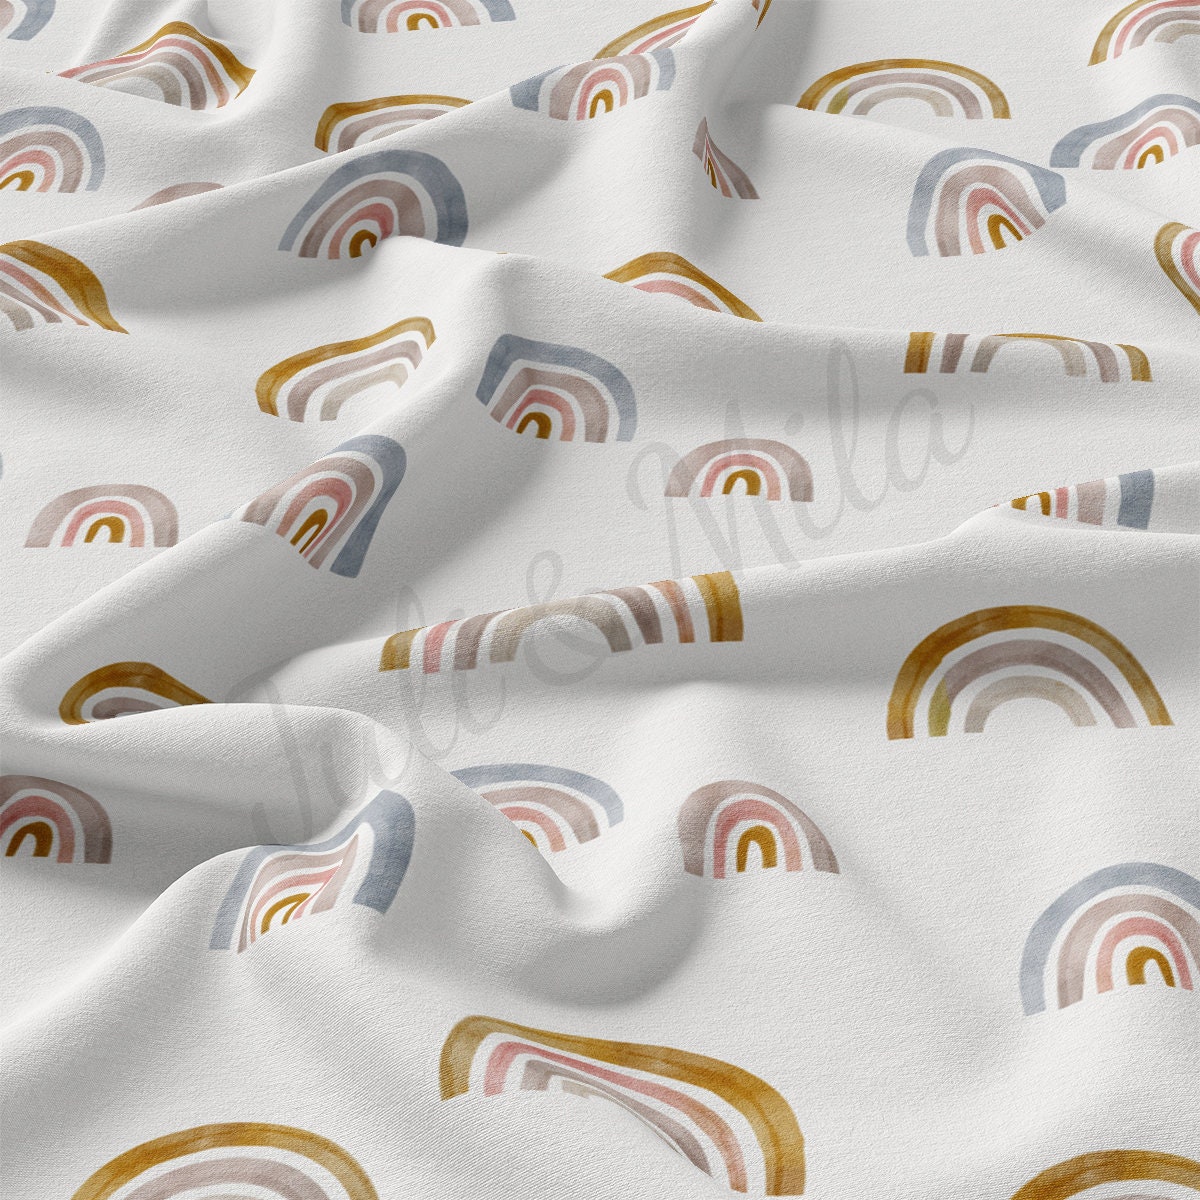 DBP Fabric Double Brushed Polyester DBP2463 Rainbow